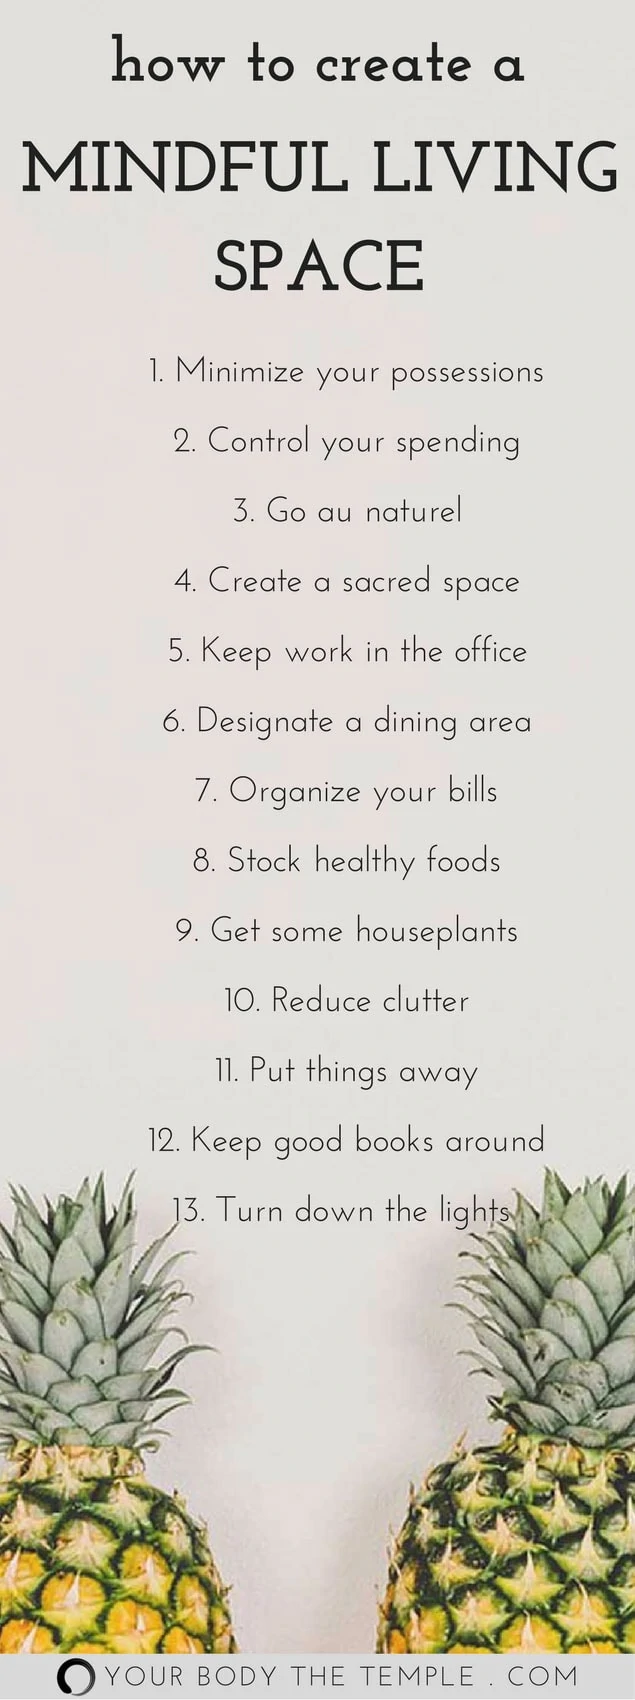 mindful living space